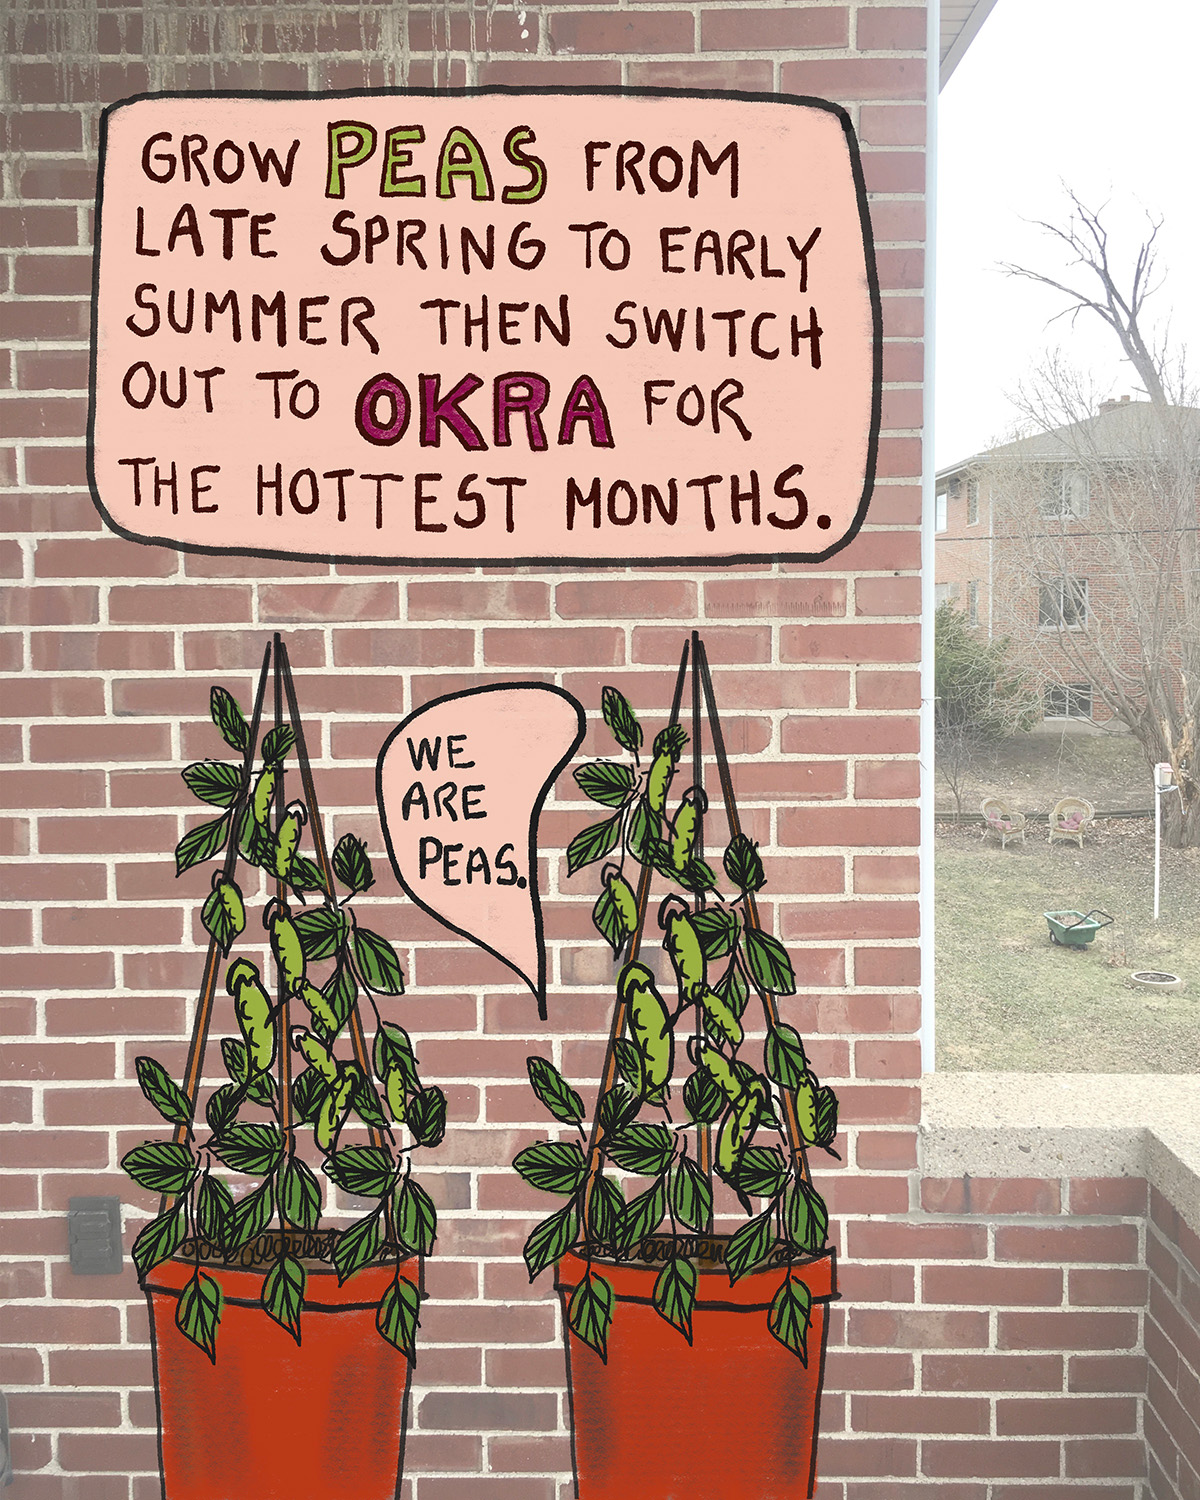 A photo of a brick wall with an overlaid illustration of two pots of peas 